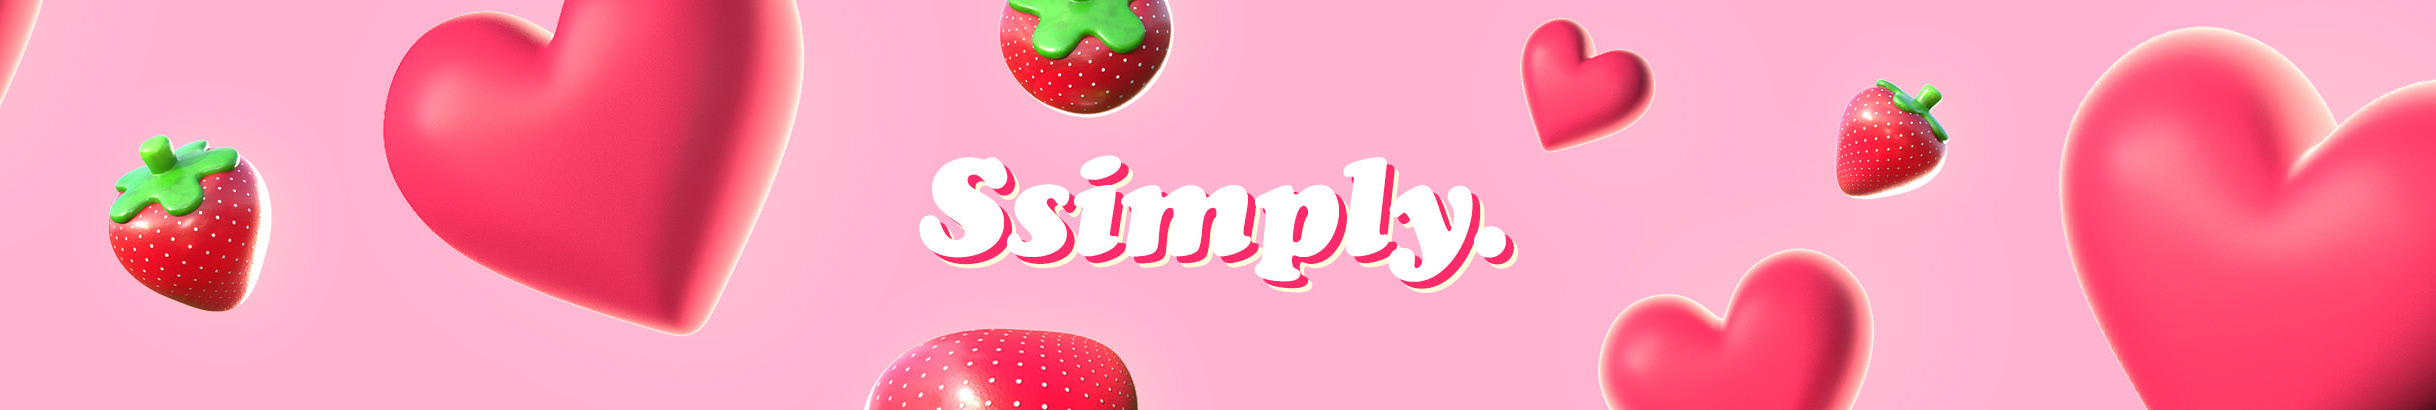 Ssimply ♥'s profile banner